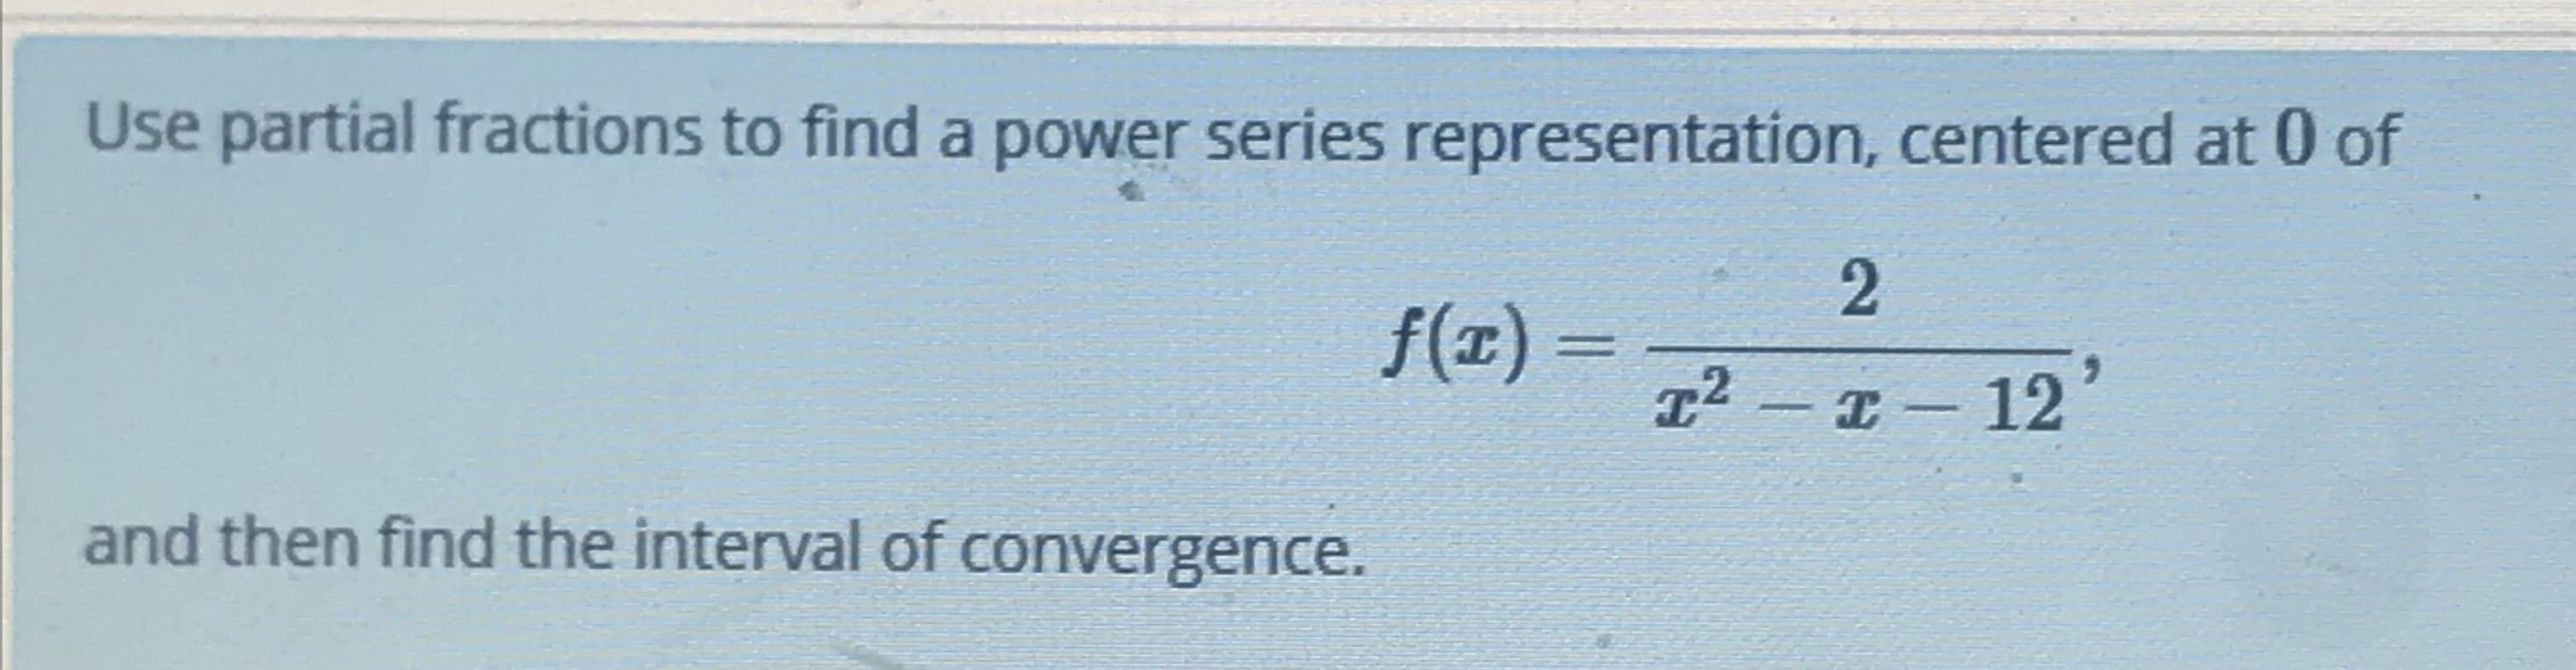 Use partial fractions to find a power series representation, centered at 0 of
f(1) =
12 - I- 12
and then find the interval of convergence,
